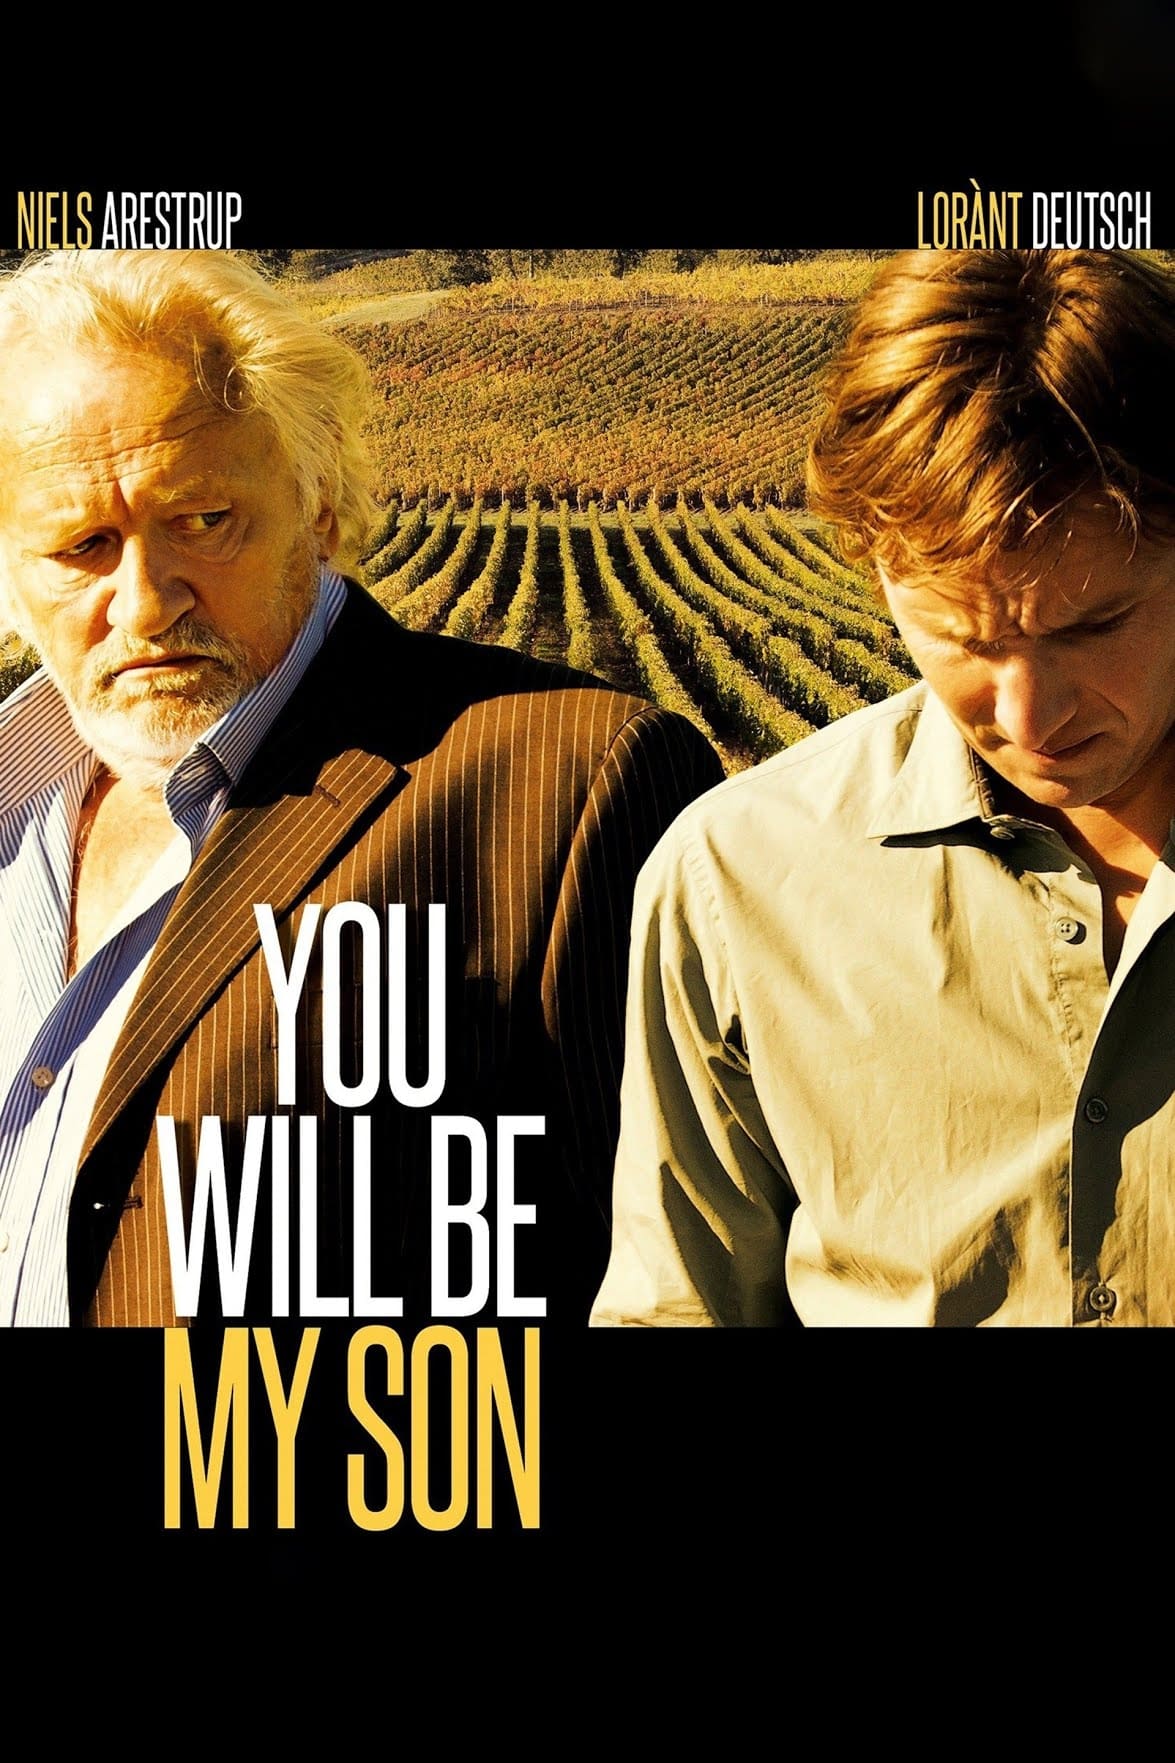 You Will Be My Son (2011)